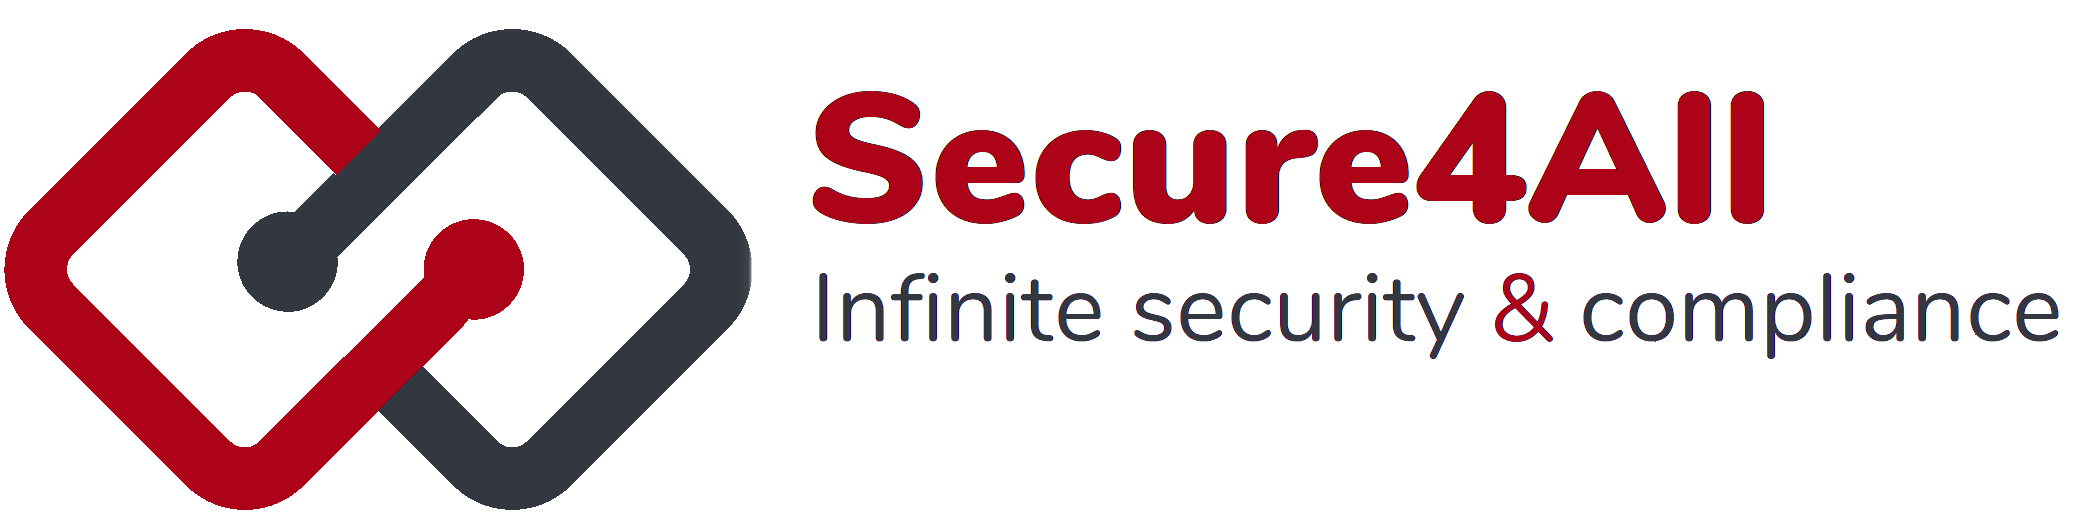 LOGO-Secure4All